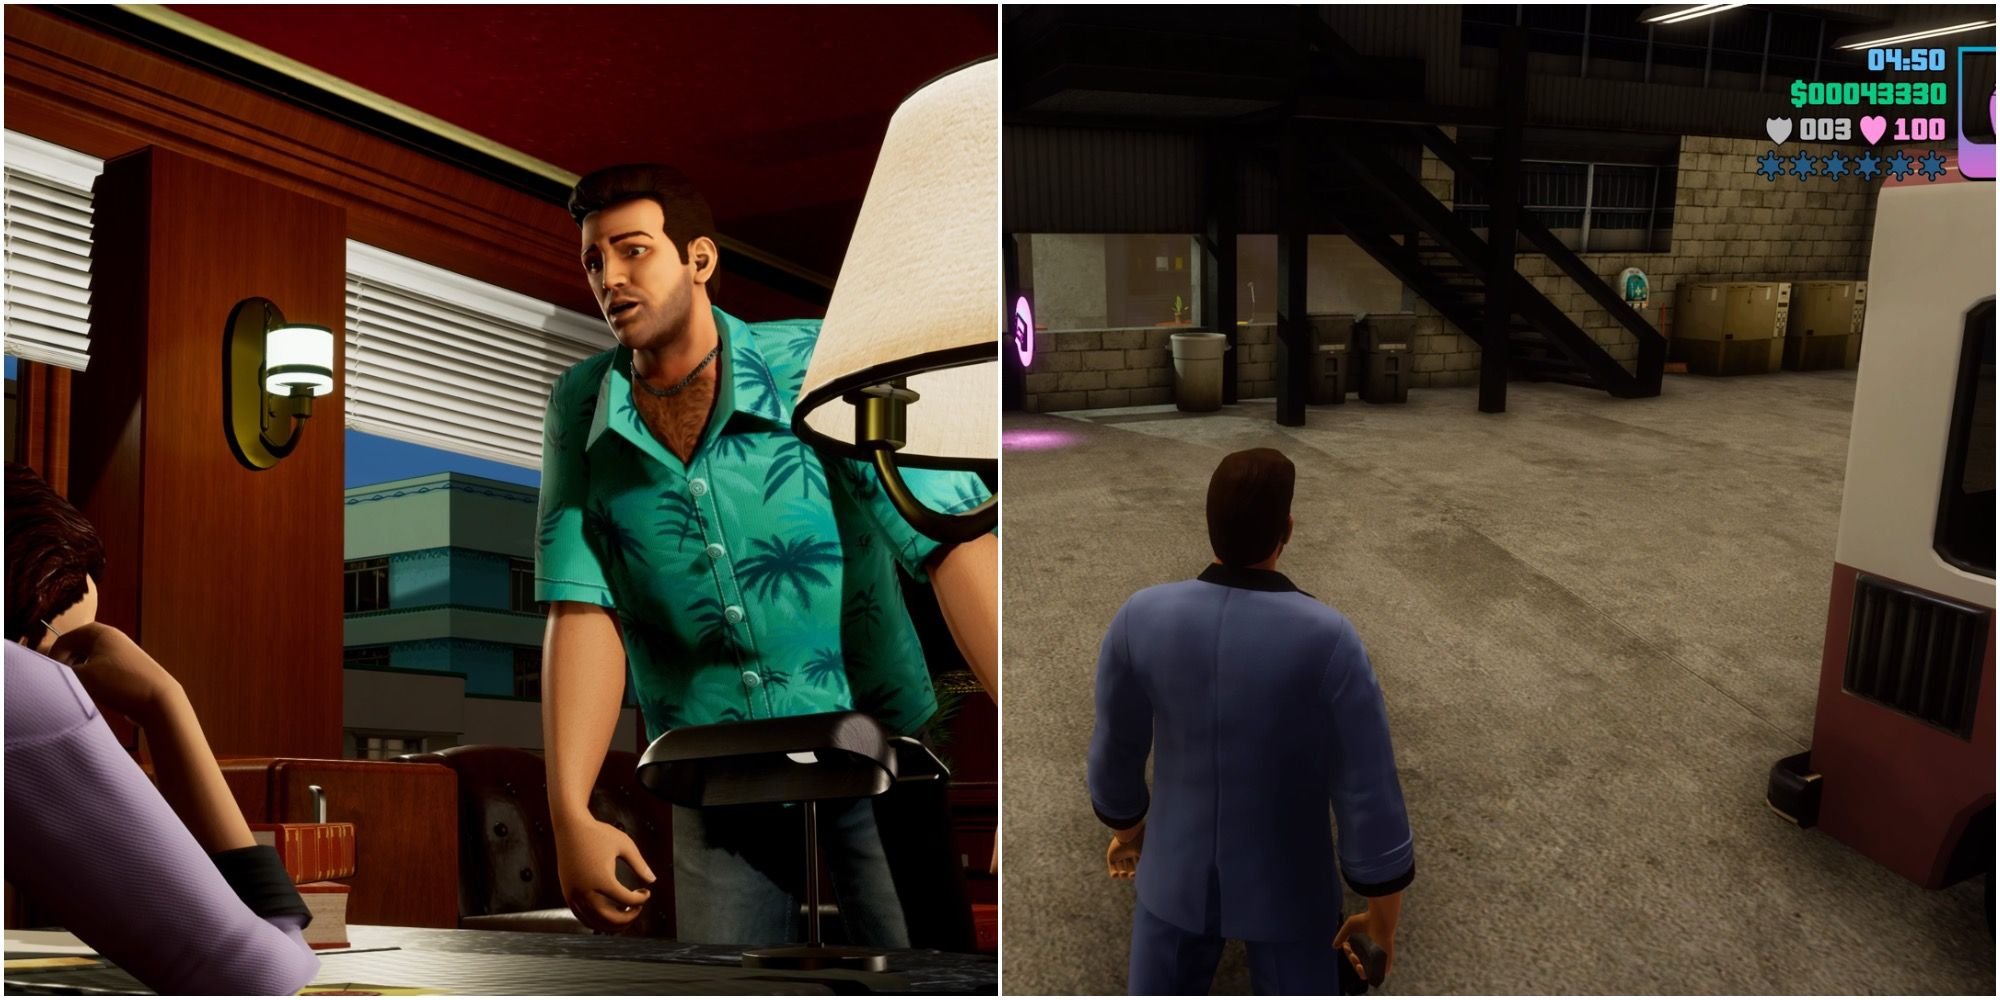 Grand Theft Auto: Vice City - How To Earn Money Fast